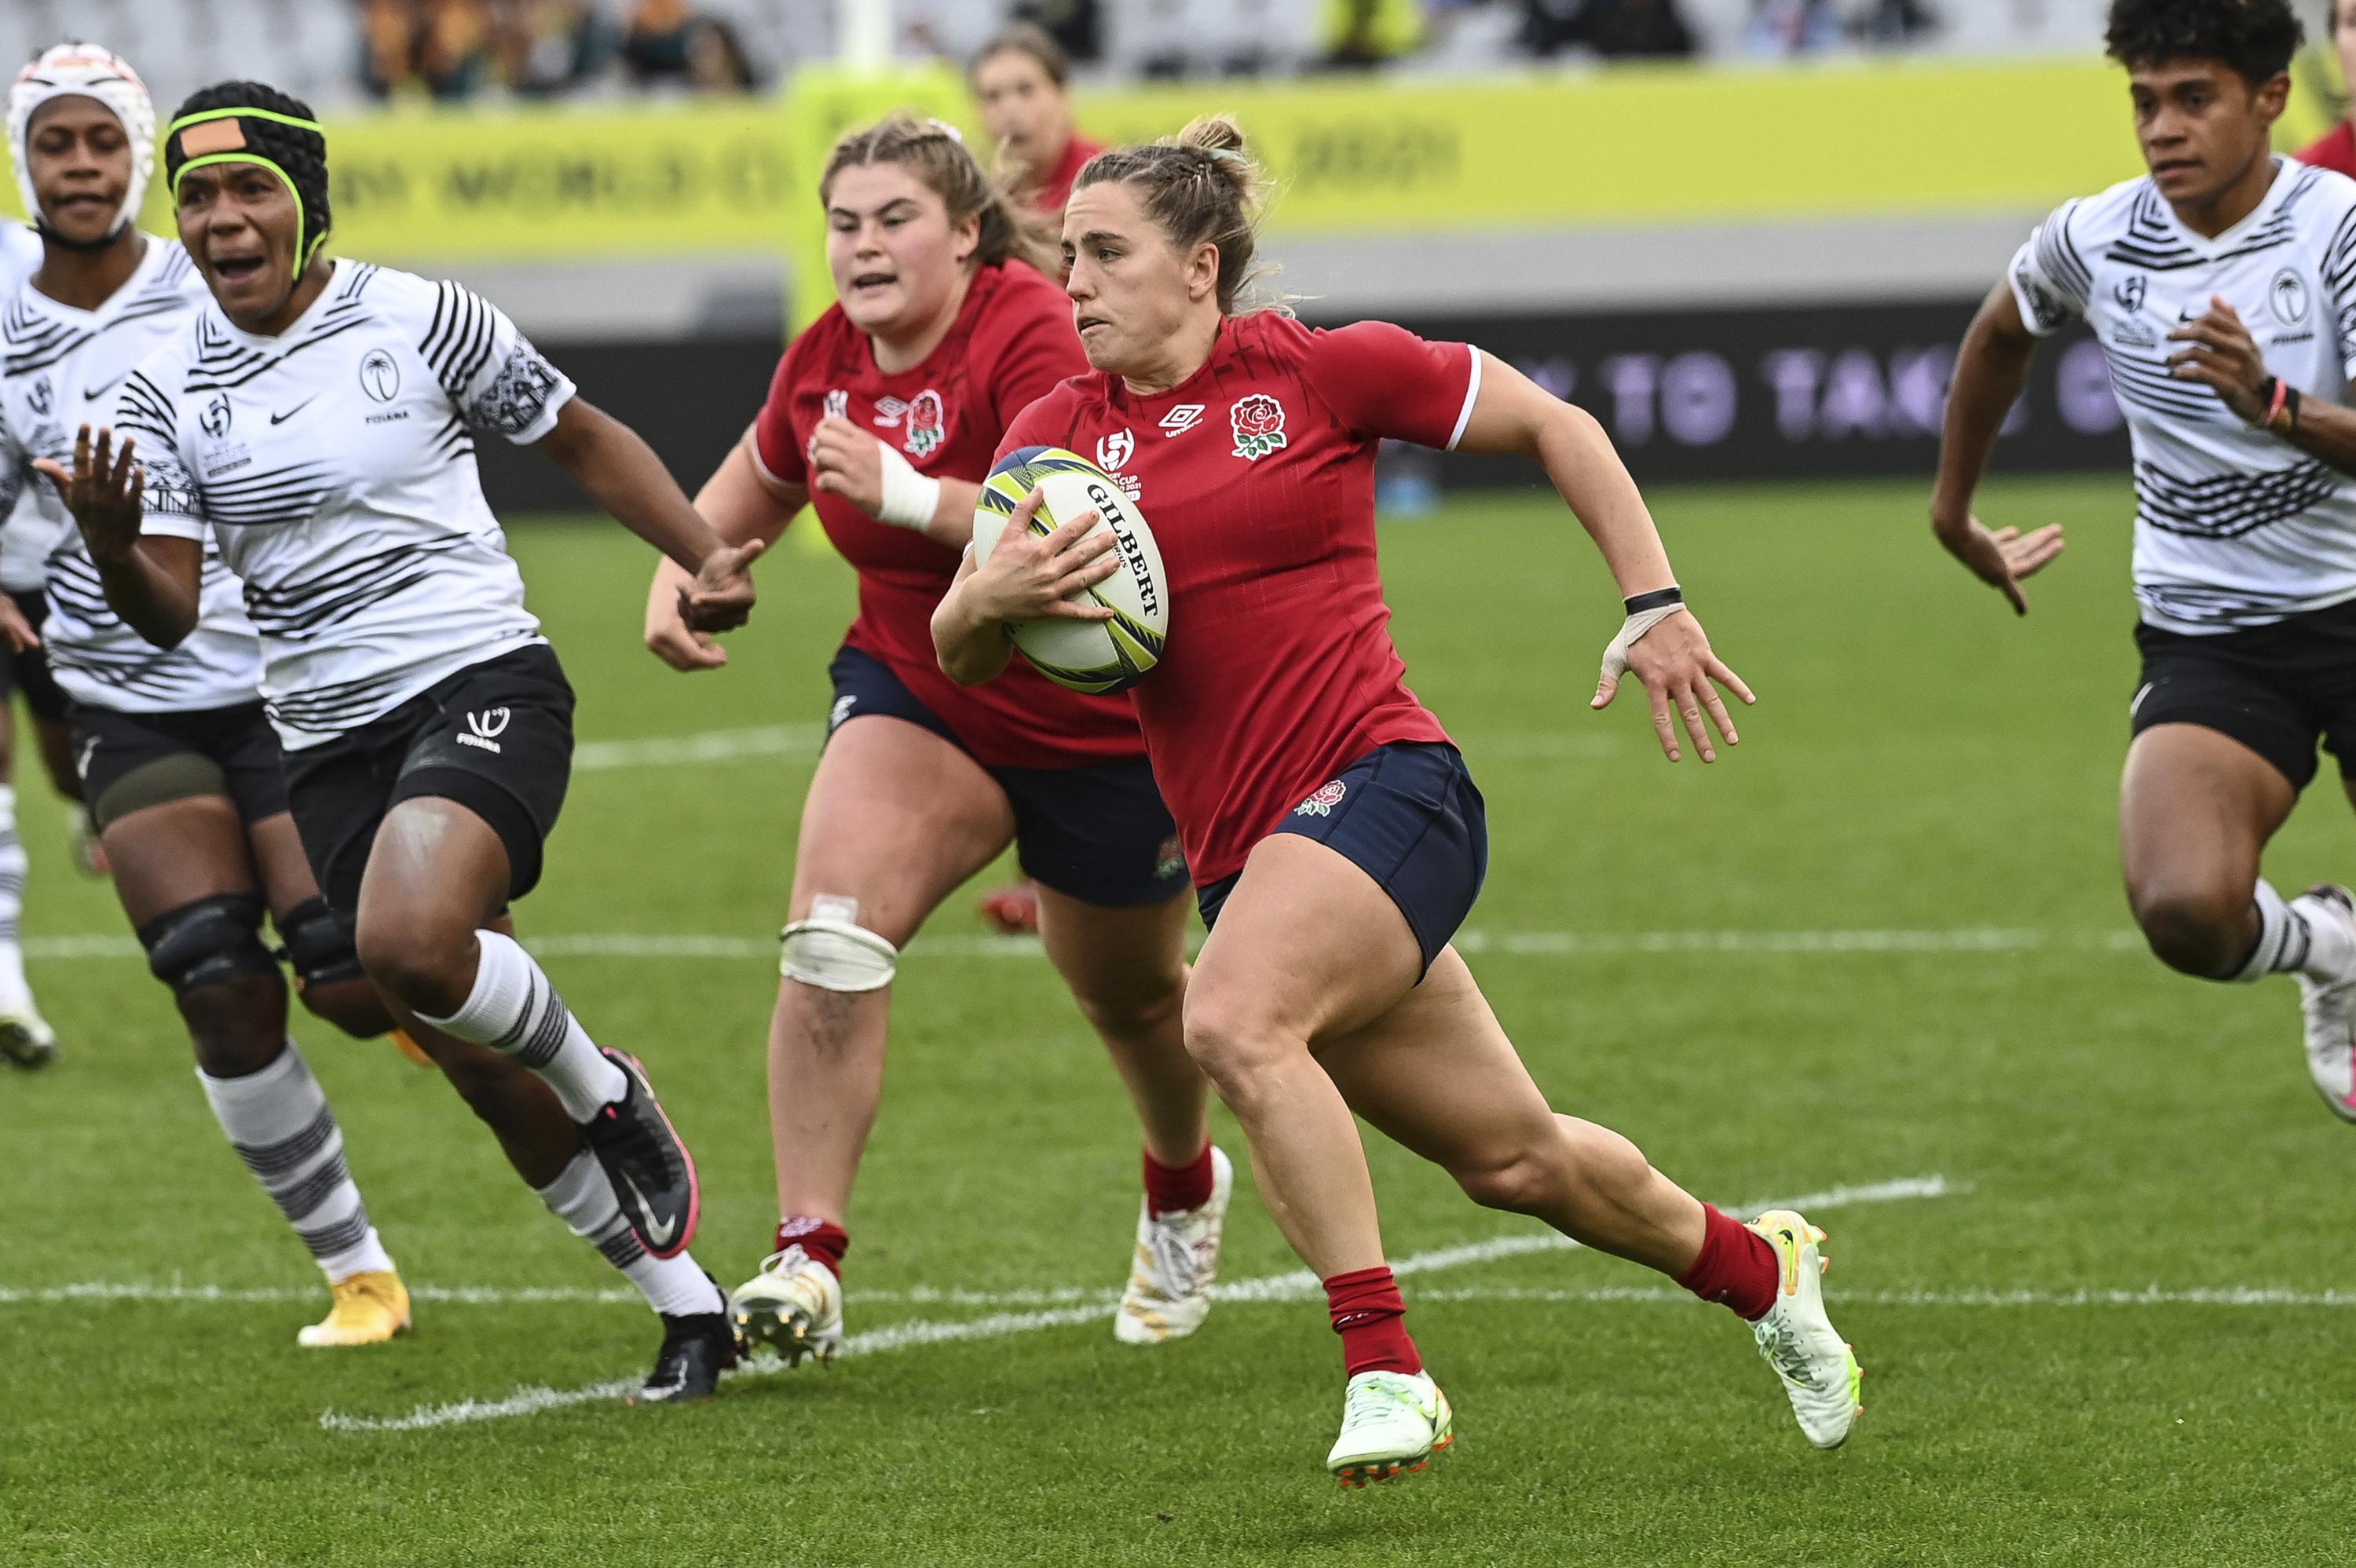 England edges France in Women's Rugby World Cup thriller | AP News